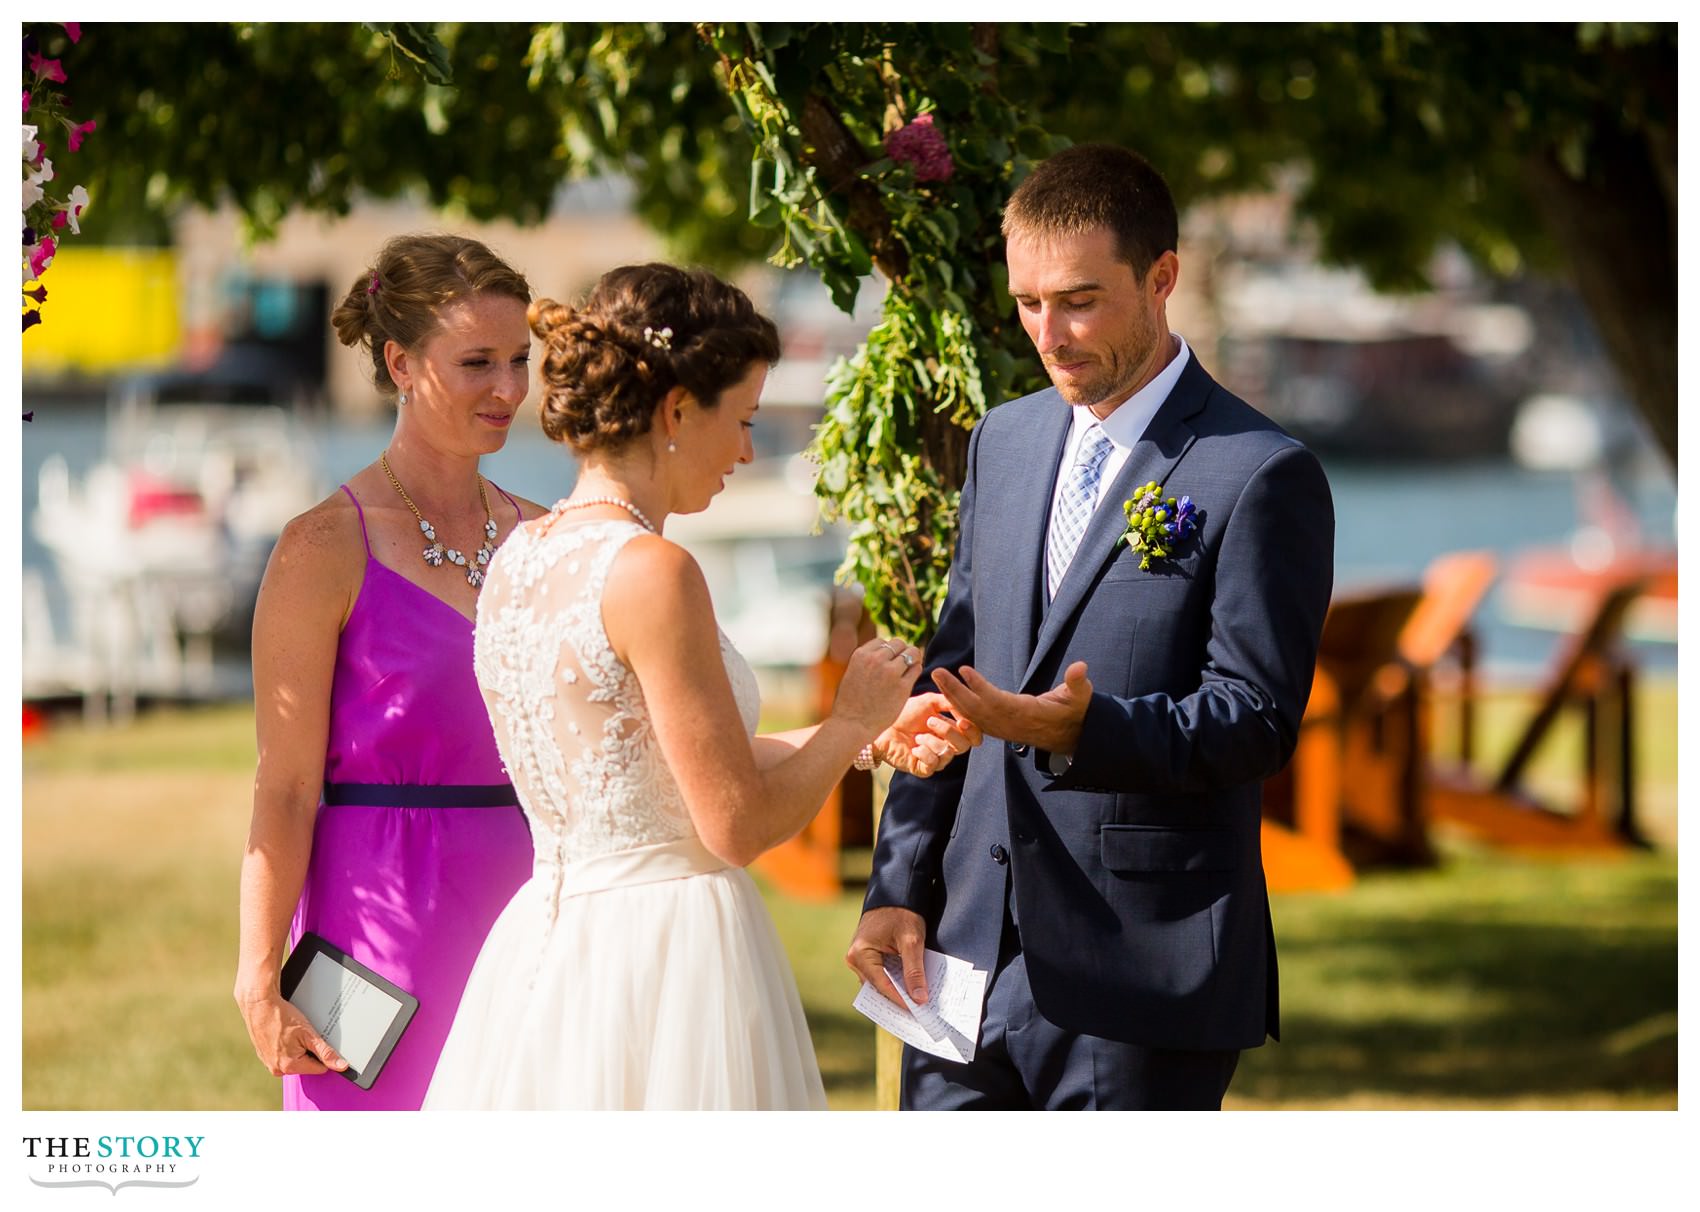 bride places ring on the groom's finger during outdoor wedding ceremony